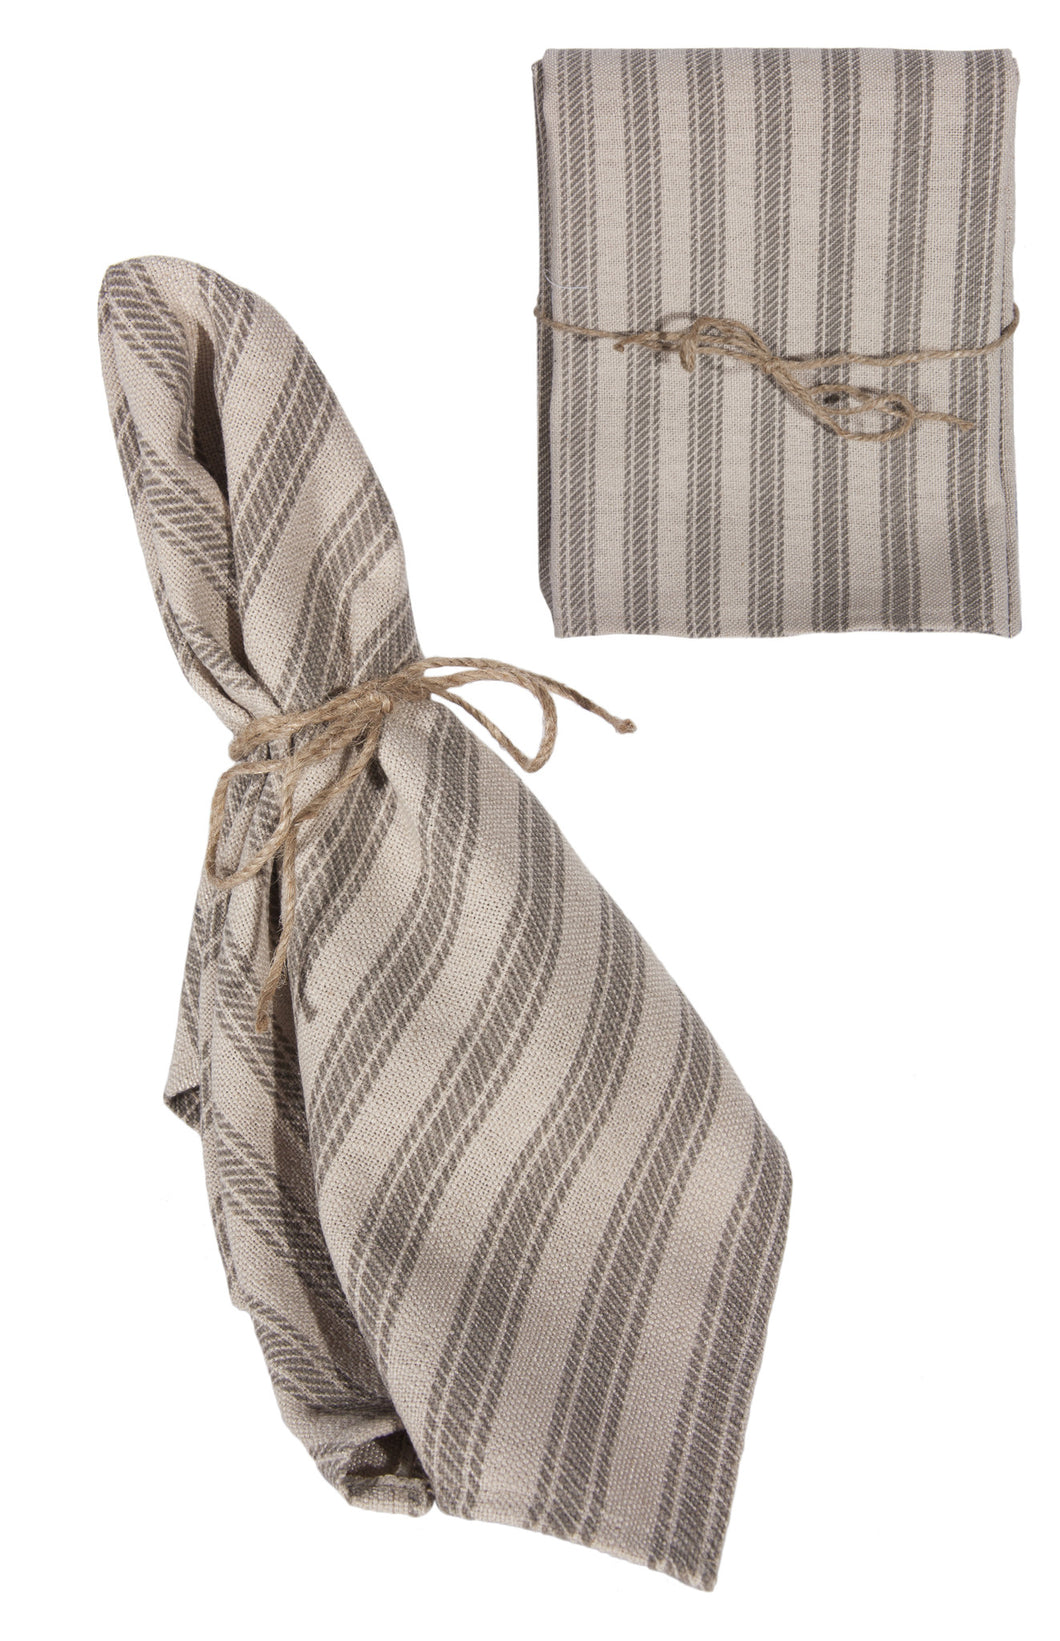 L709S-STRP Printed Ticking Stripe set of 4 Napkins Linen Blend tied with Twine for The Lake House Collection